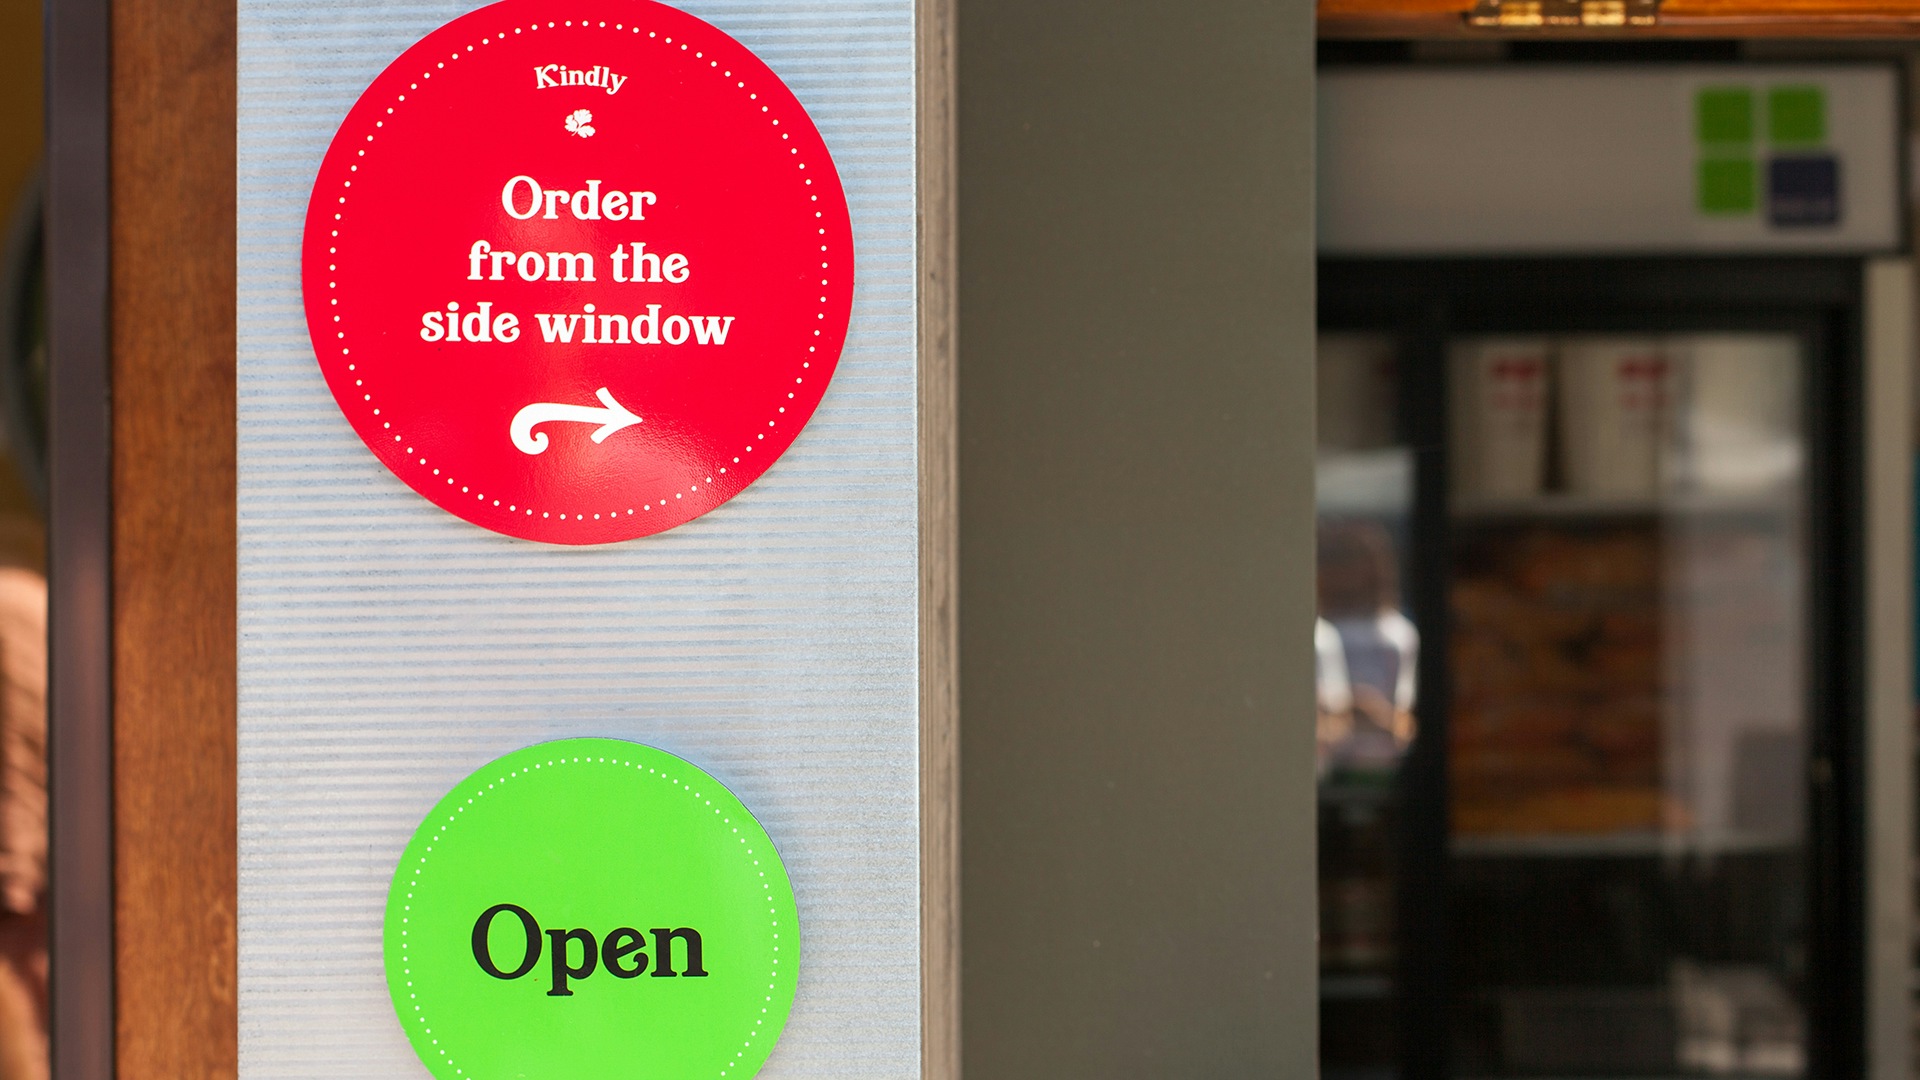 A photograph of restaurant's signgage. A green open sign set in the brand font, and another round sign in red that reads "Order from the side window."